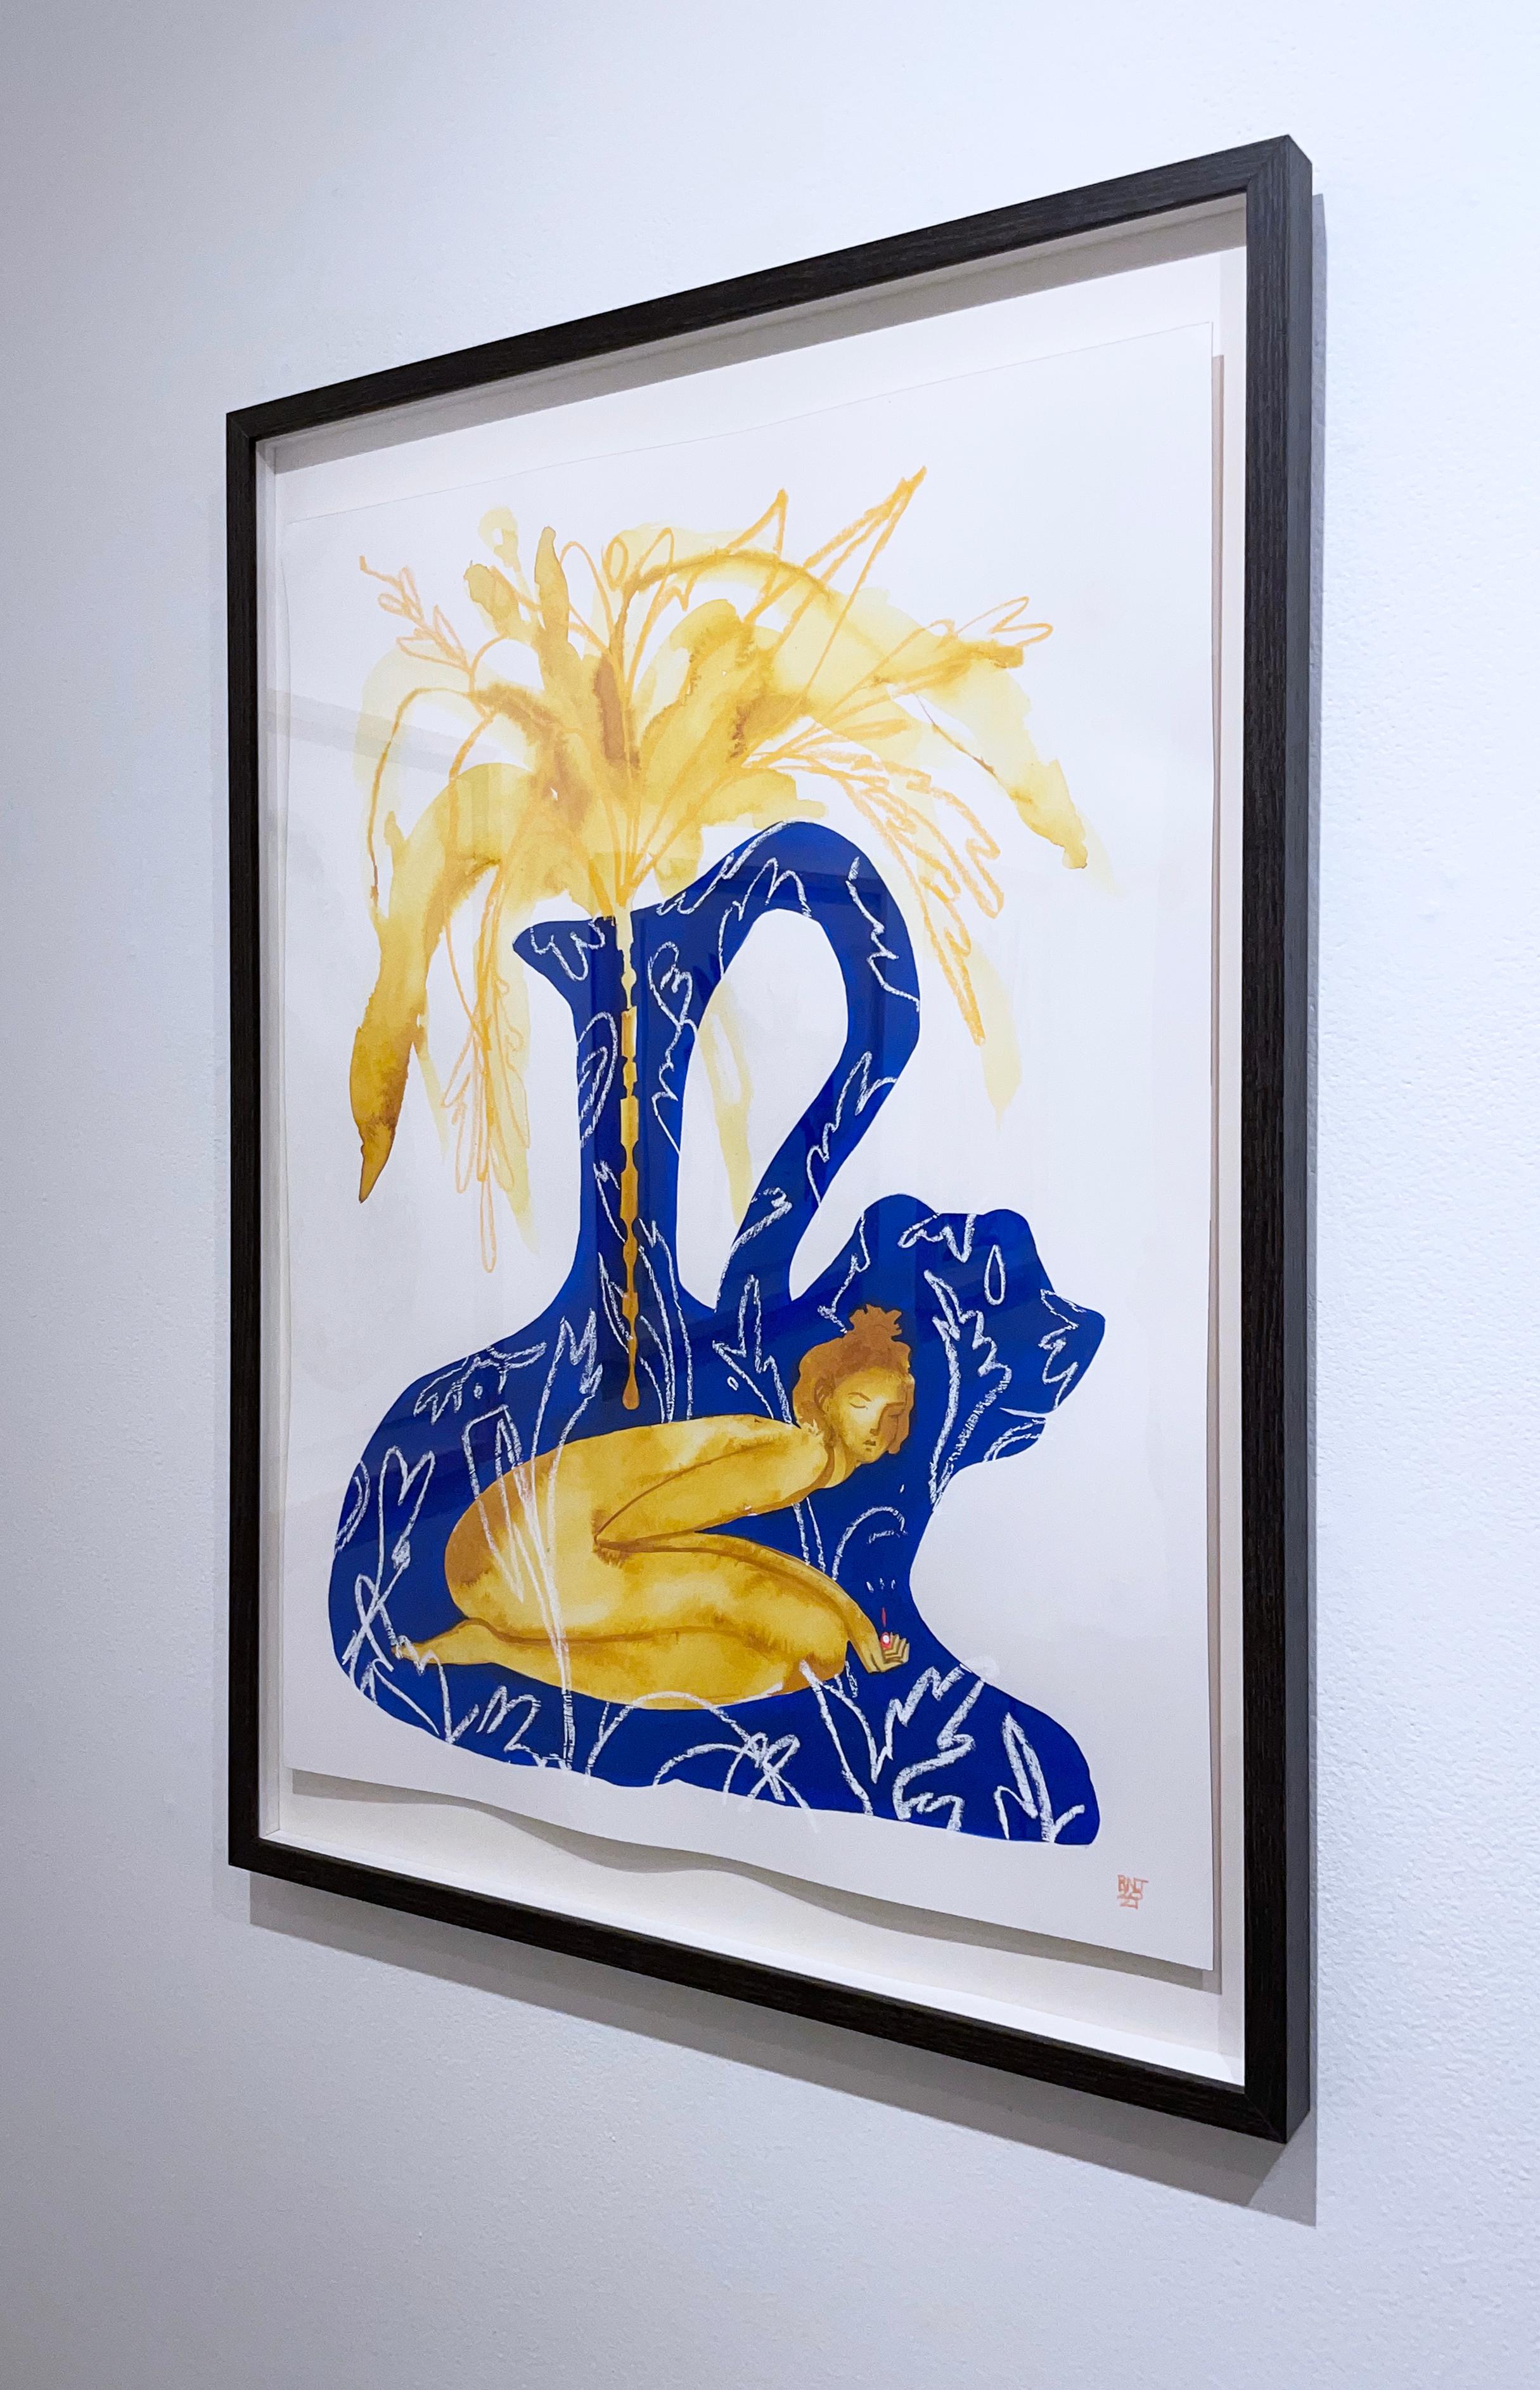 Female figure, vase, foliage, florals; acrylic ink, flashe and pastel on 300g Arches hot press paper; custom framed, shallow shadow box frame. Deep blue, marigold yellow gold.  

Frame dimensions:  28 ¼ x 20 ½  x 1”